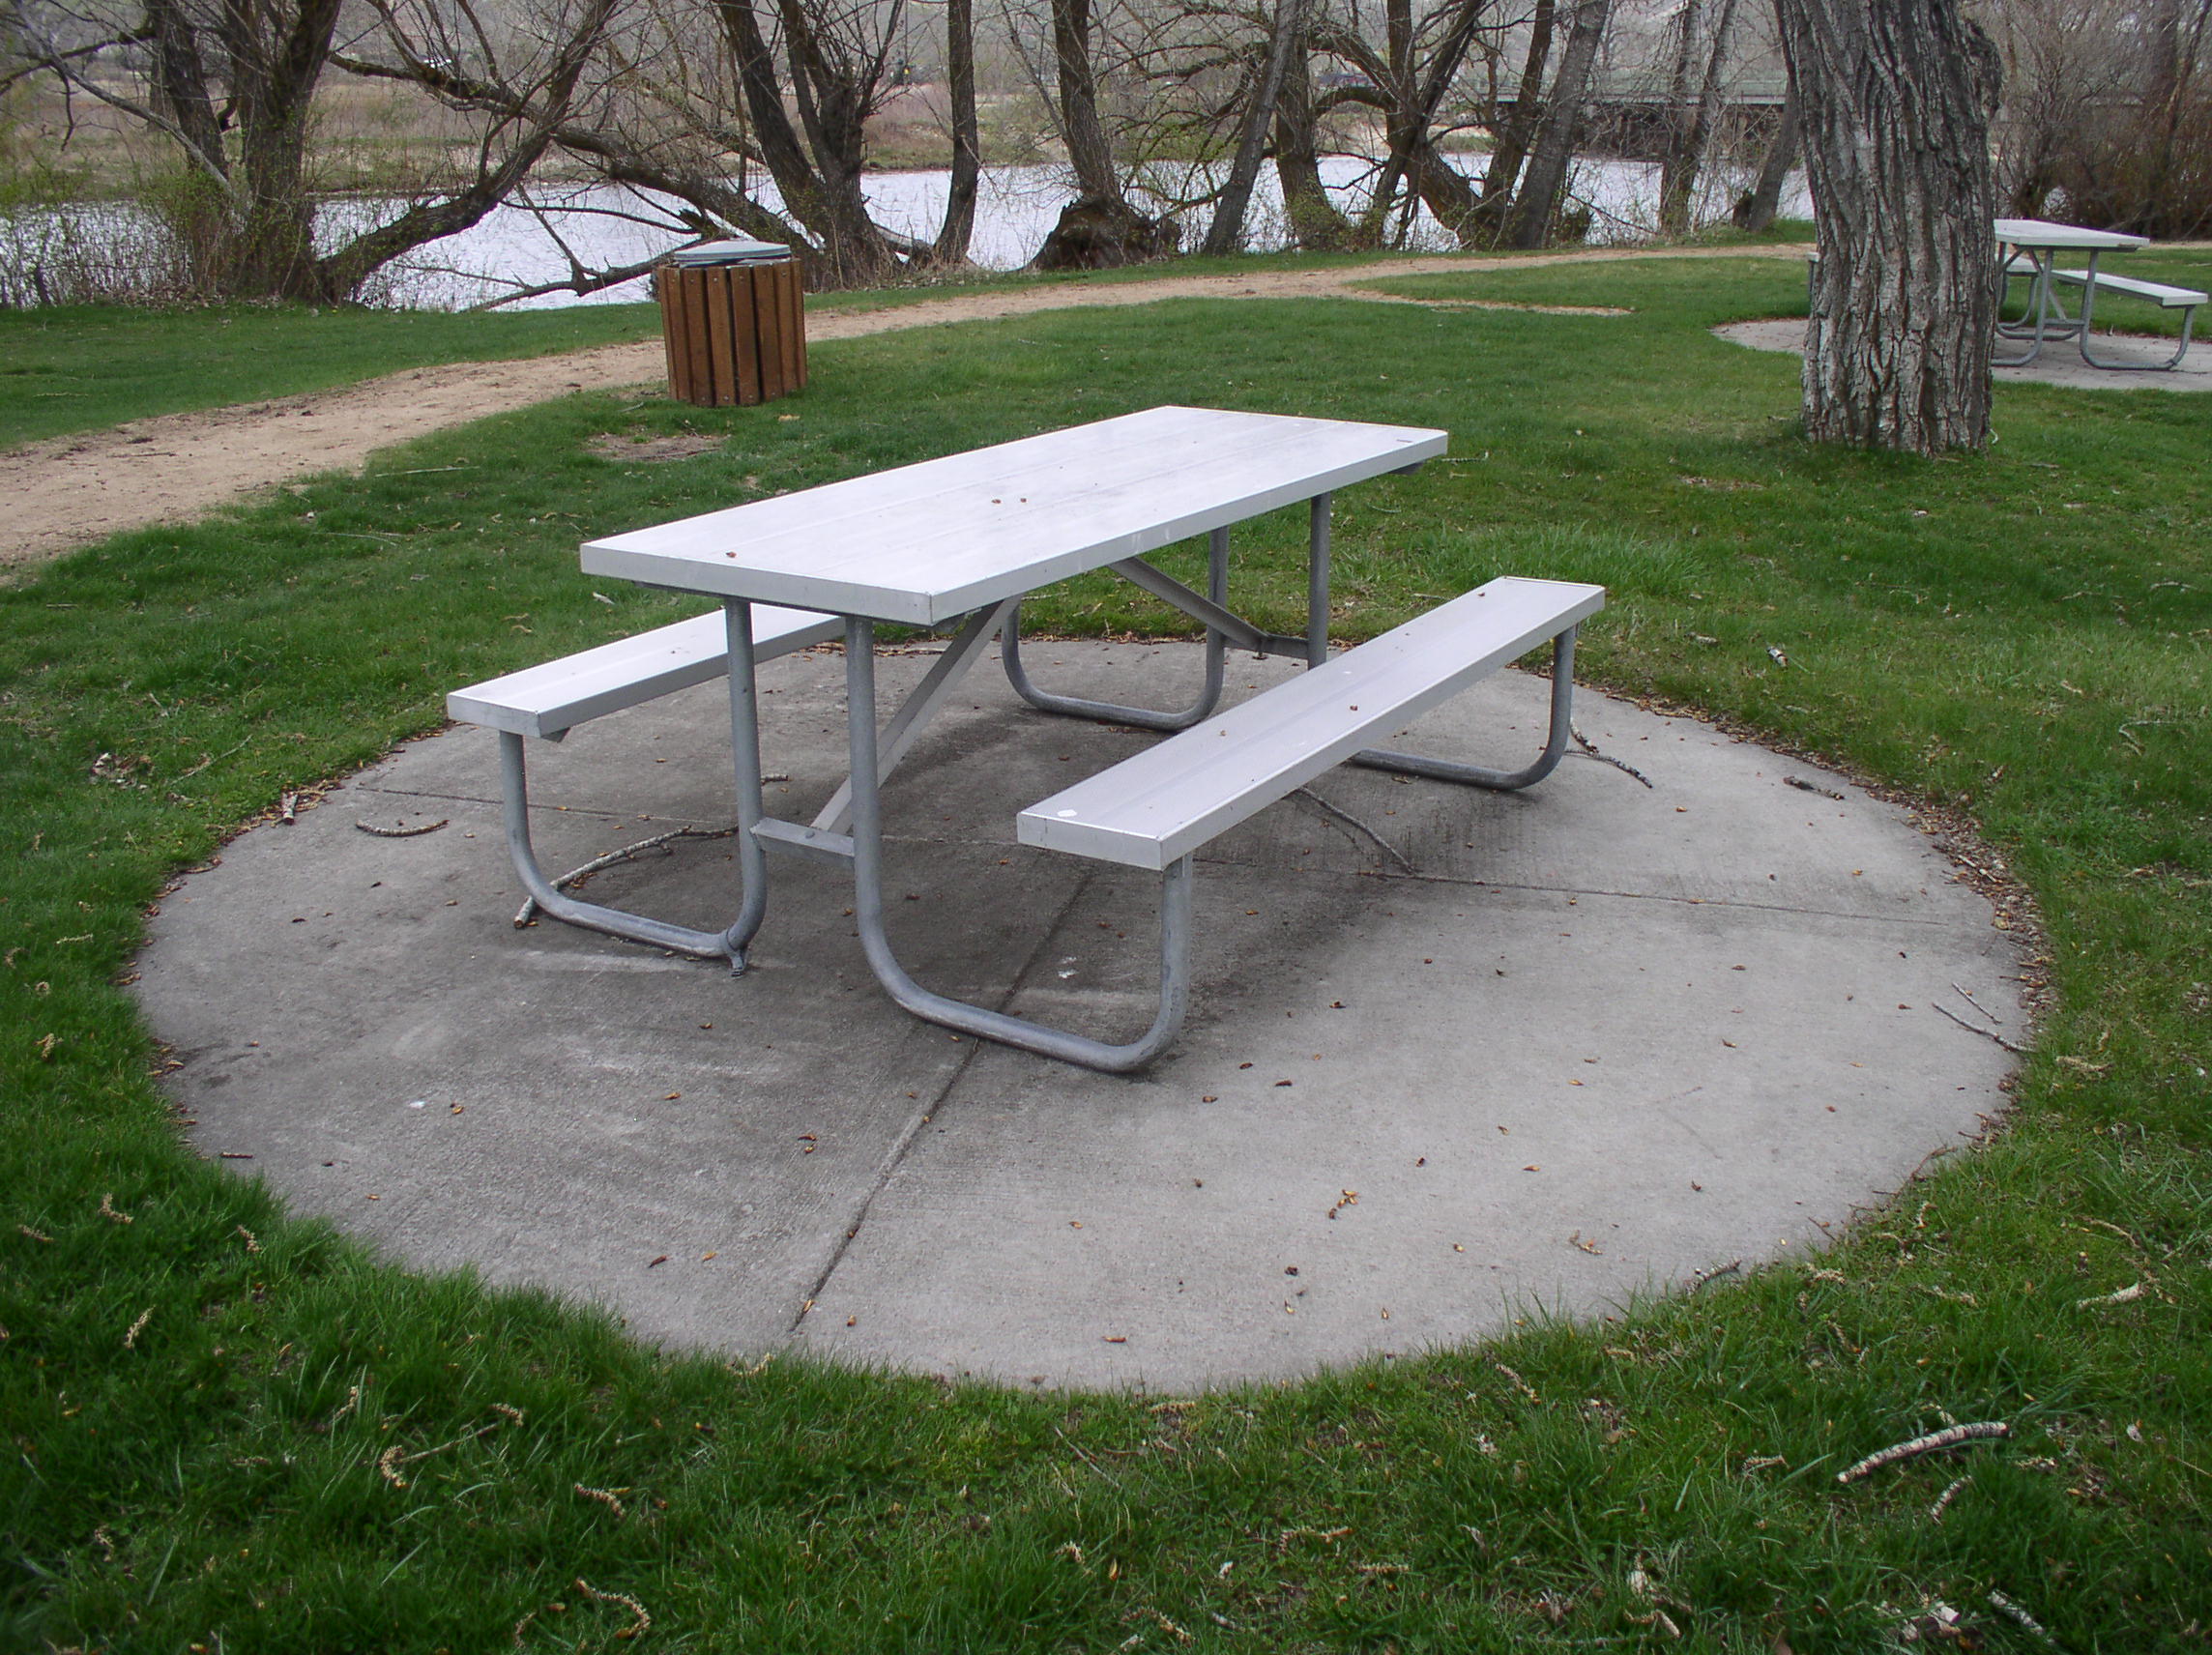 Picnic Pad without BBQ